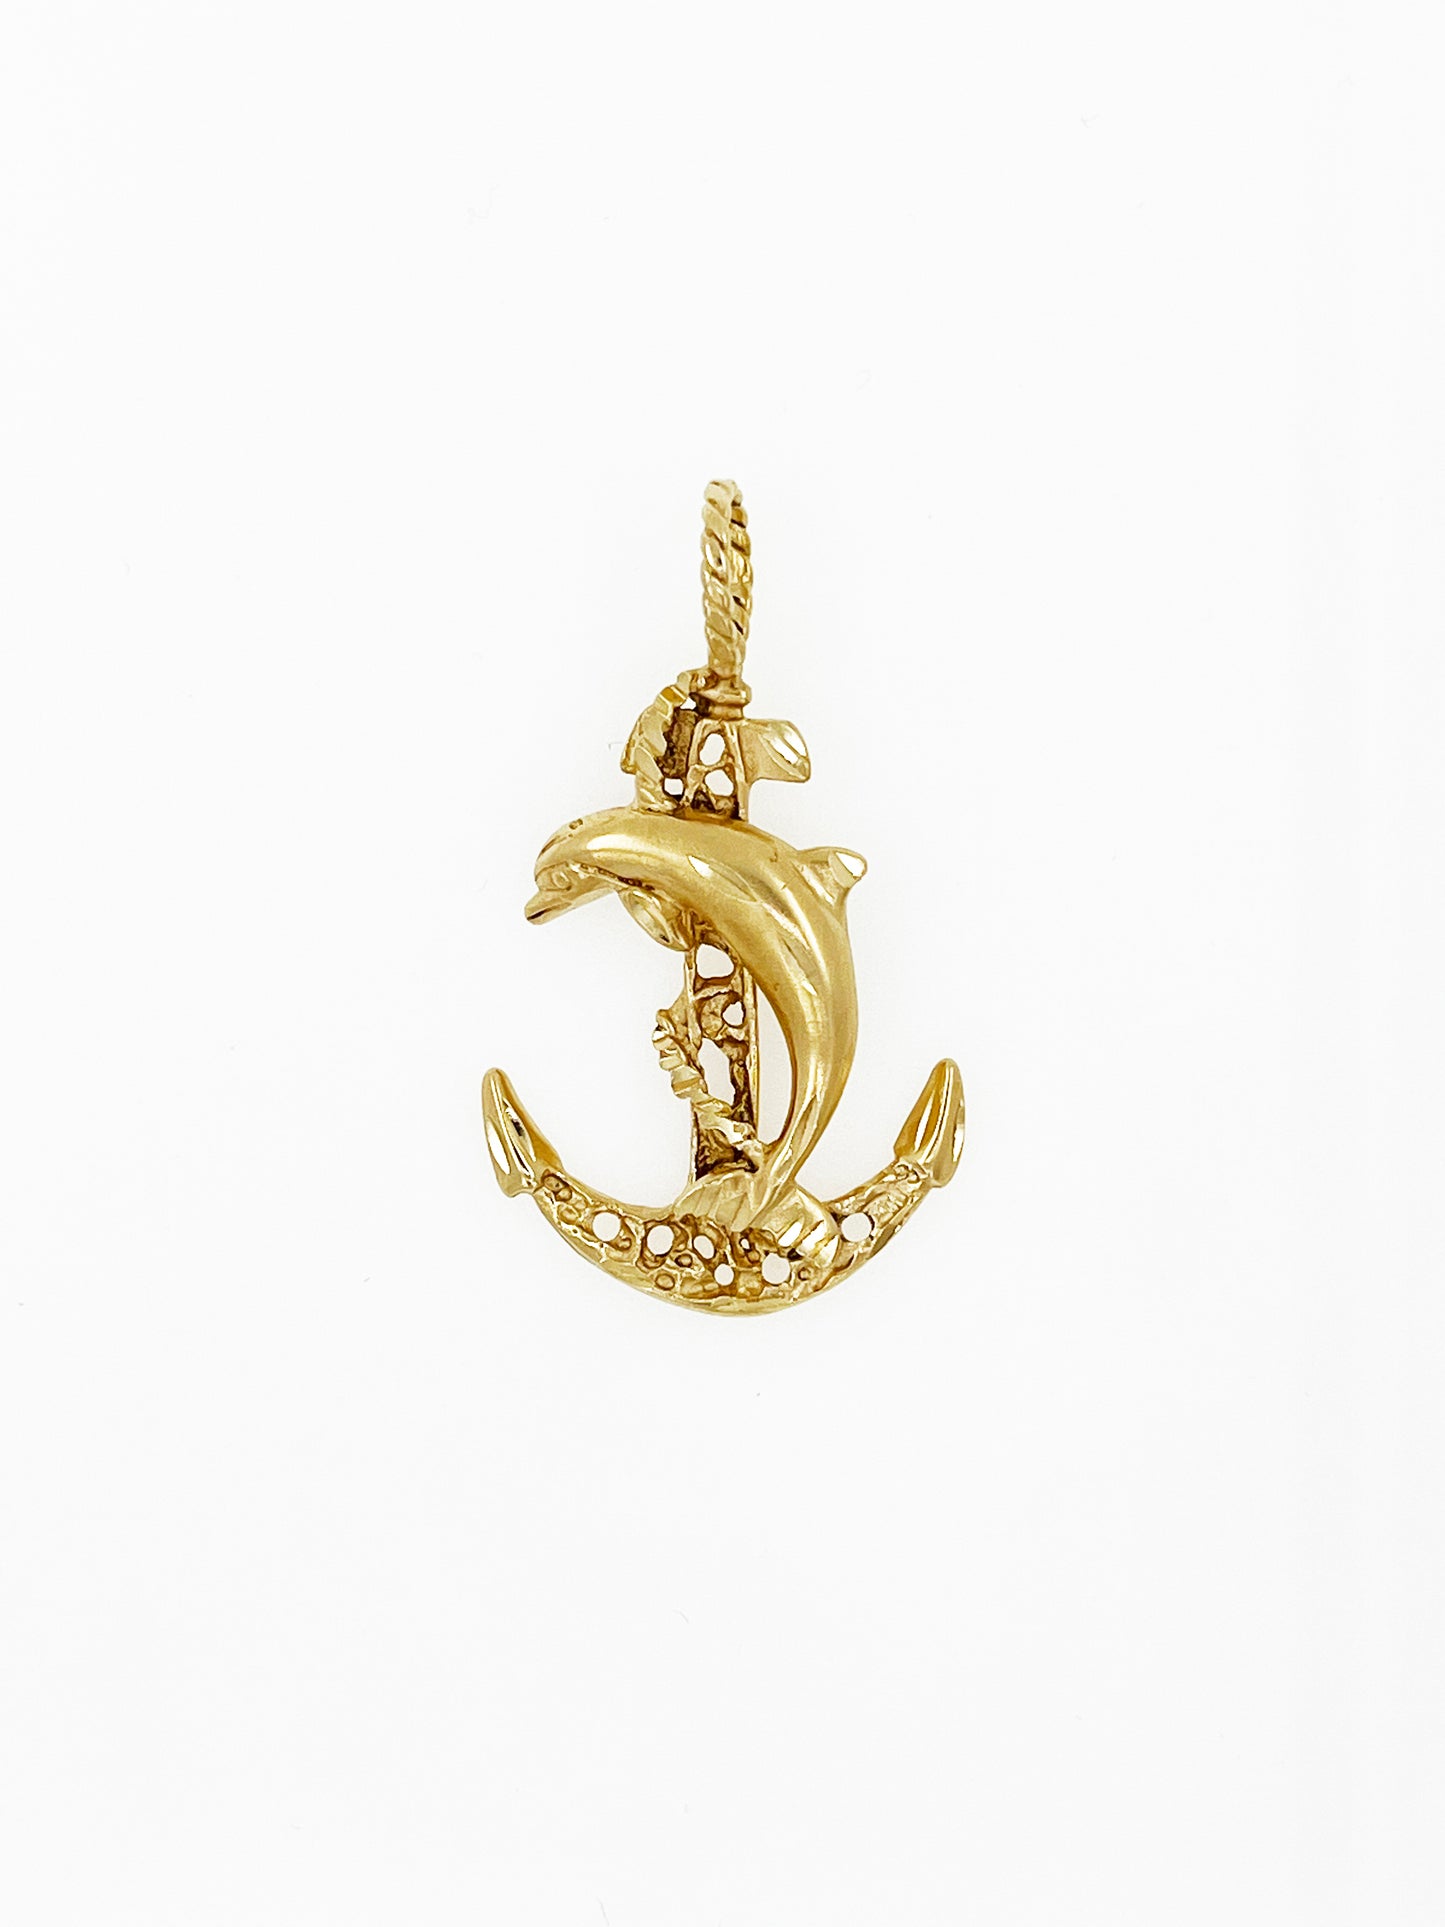 Vintage Nautical Anchor & Dolphin Pendant in 14k Yellow Gold